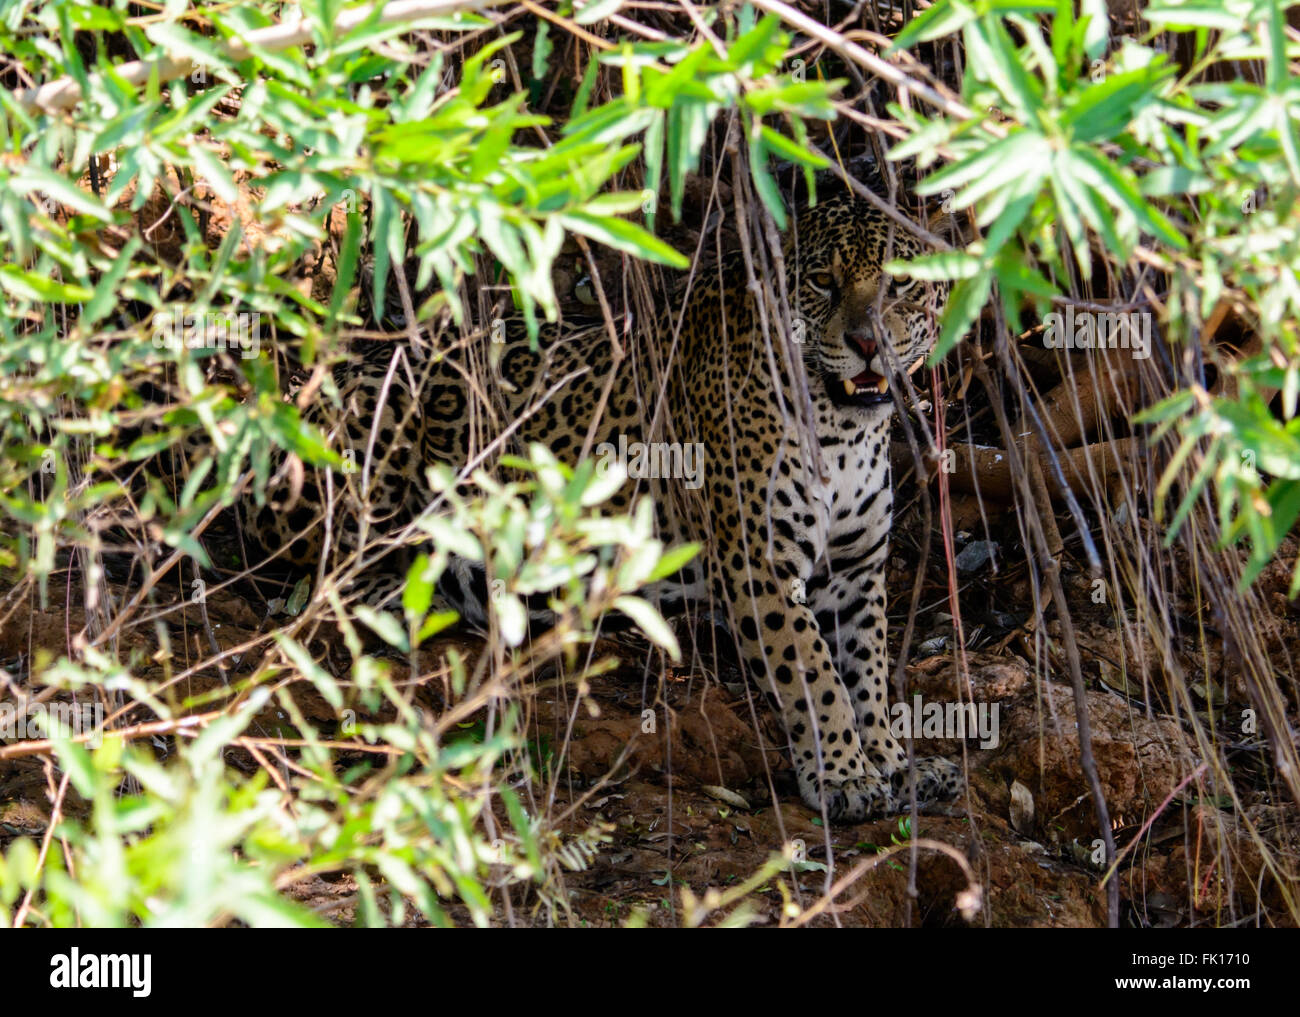 Jaguar peering out from the undergrowth Stock Photo